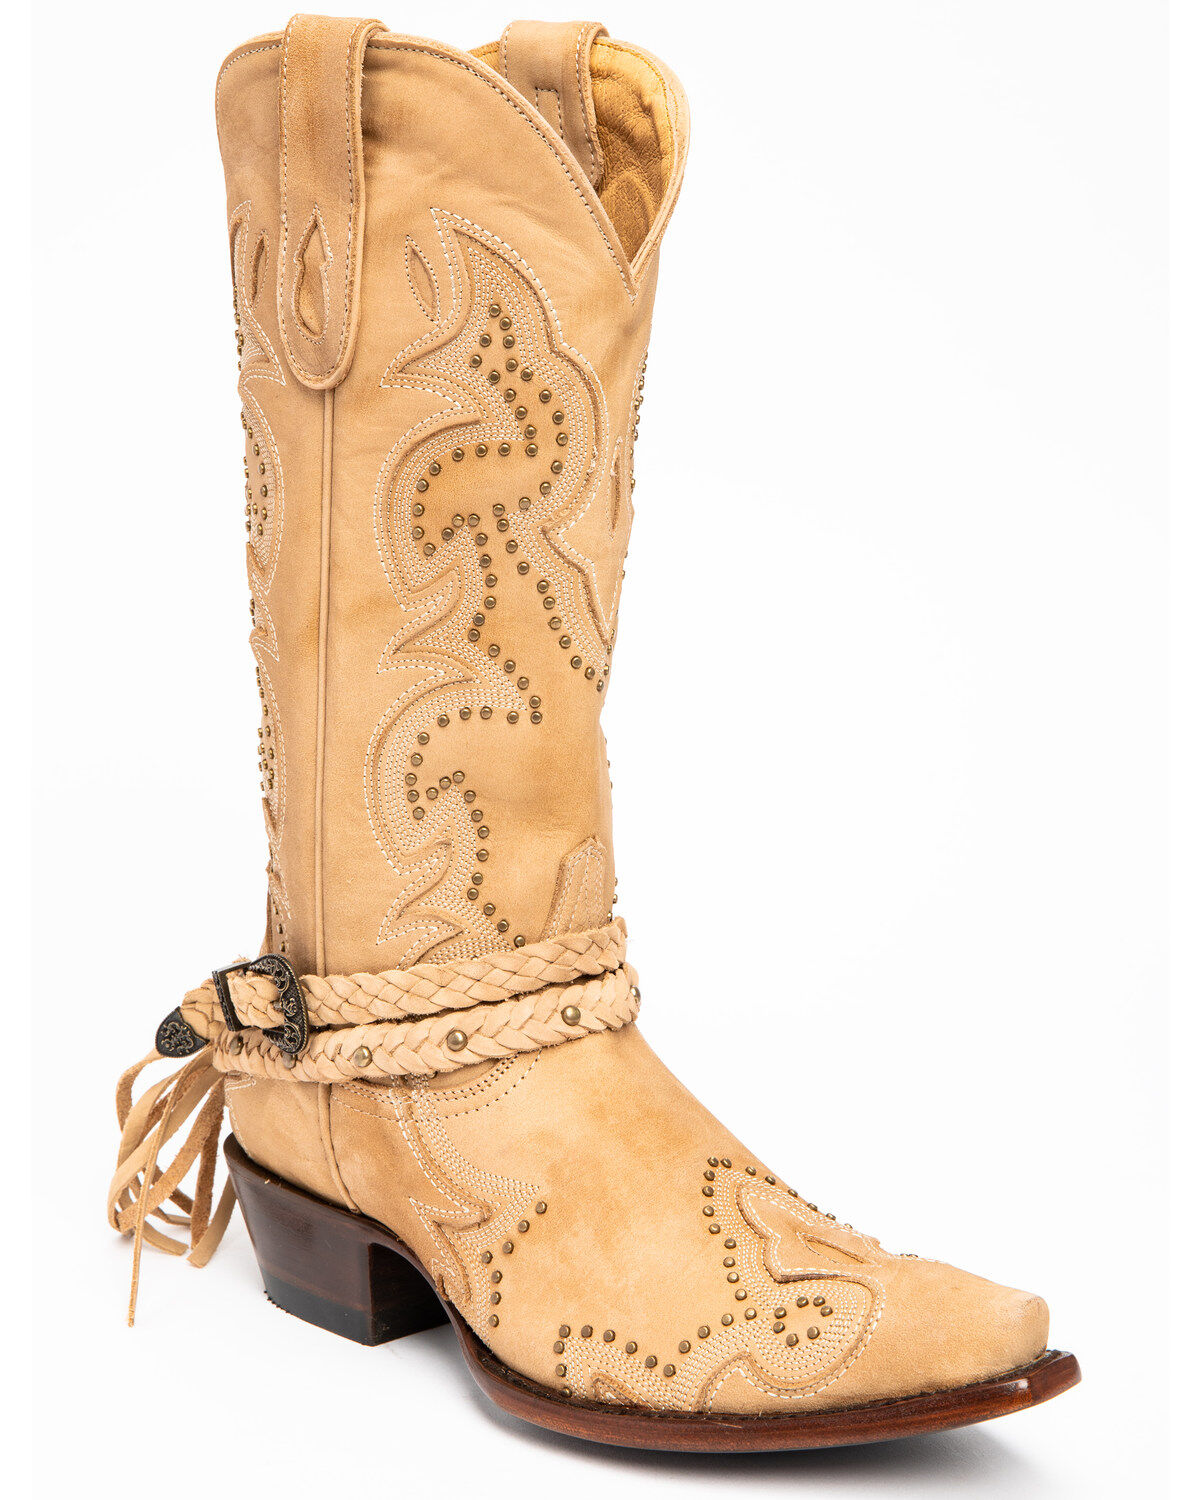 boot barn womens shoes